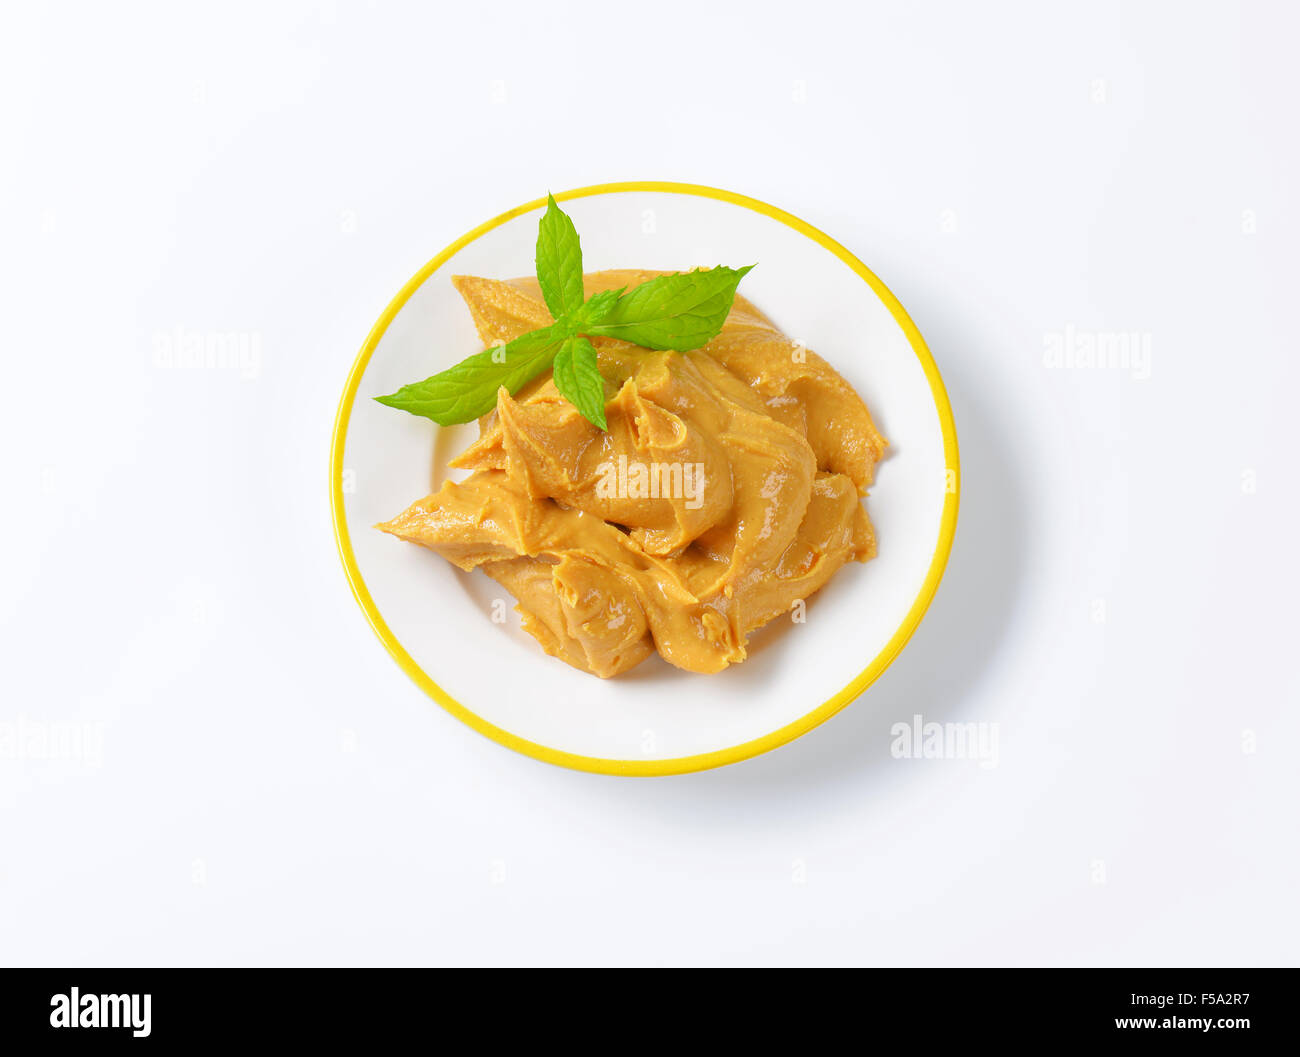 Creamy peanut butter on a plate Stock Photo